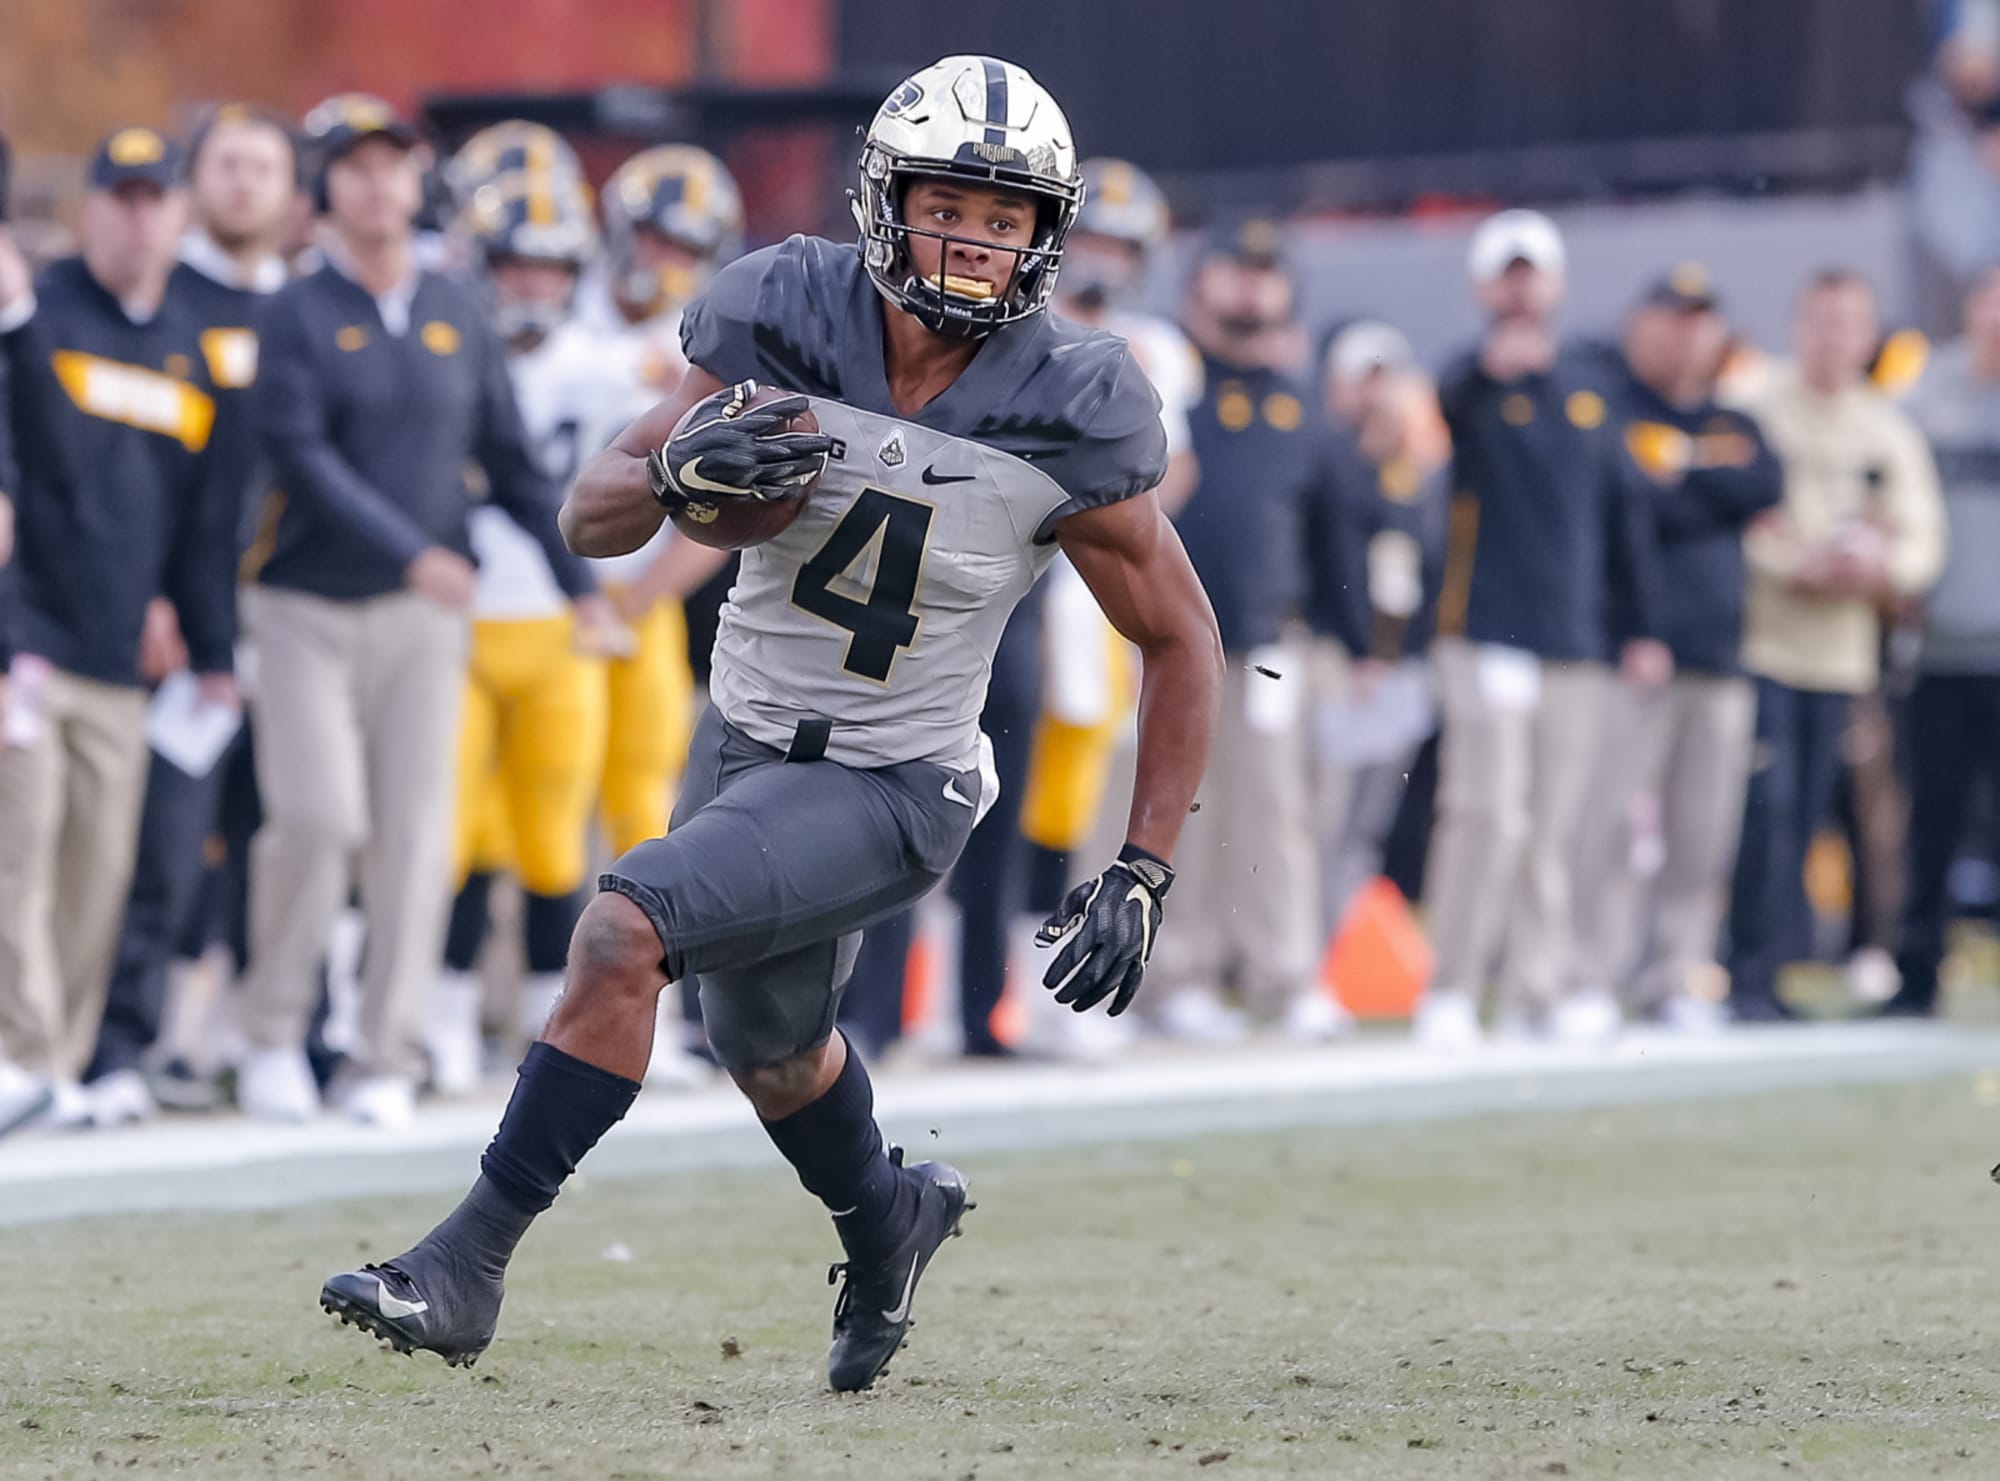 2021 NFL Draft WR rankings: Is Rondale Moore worth the risk?